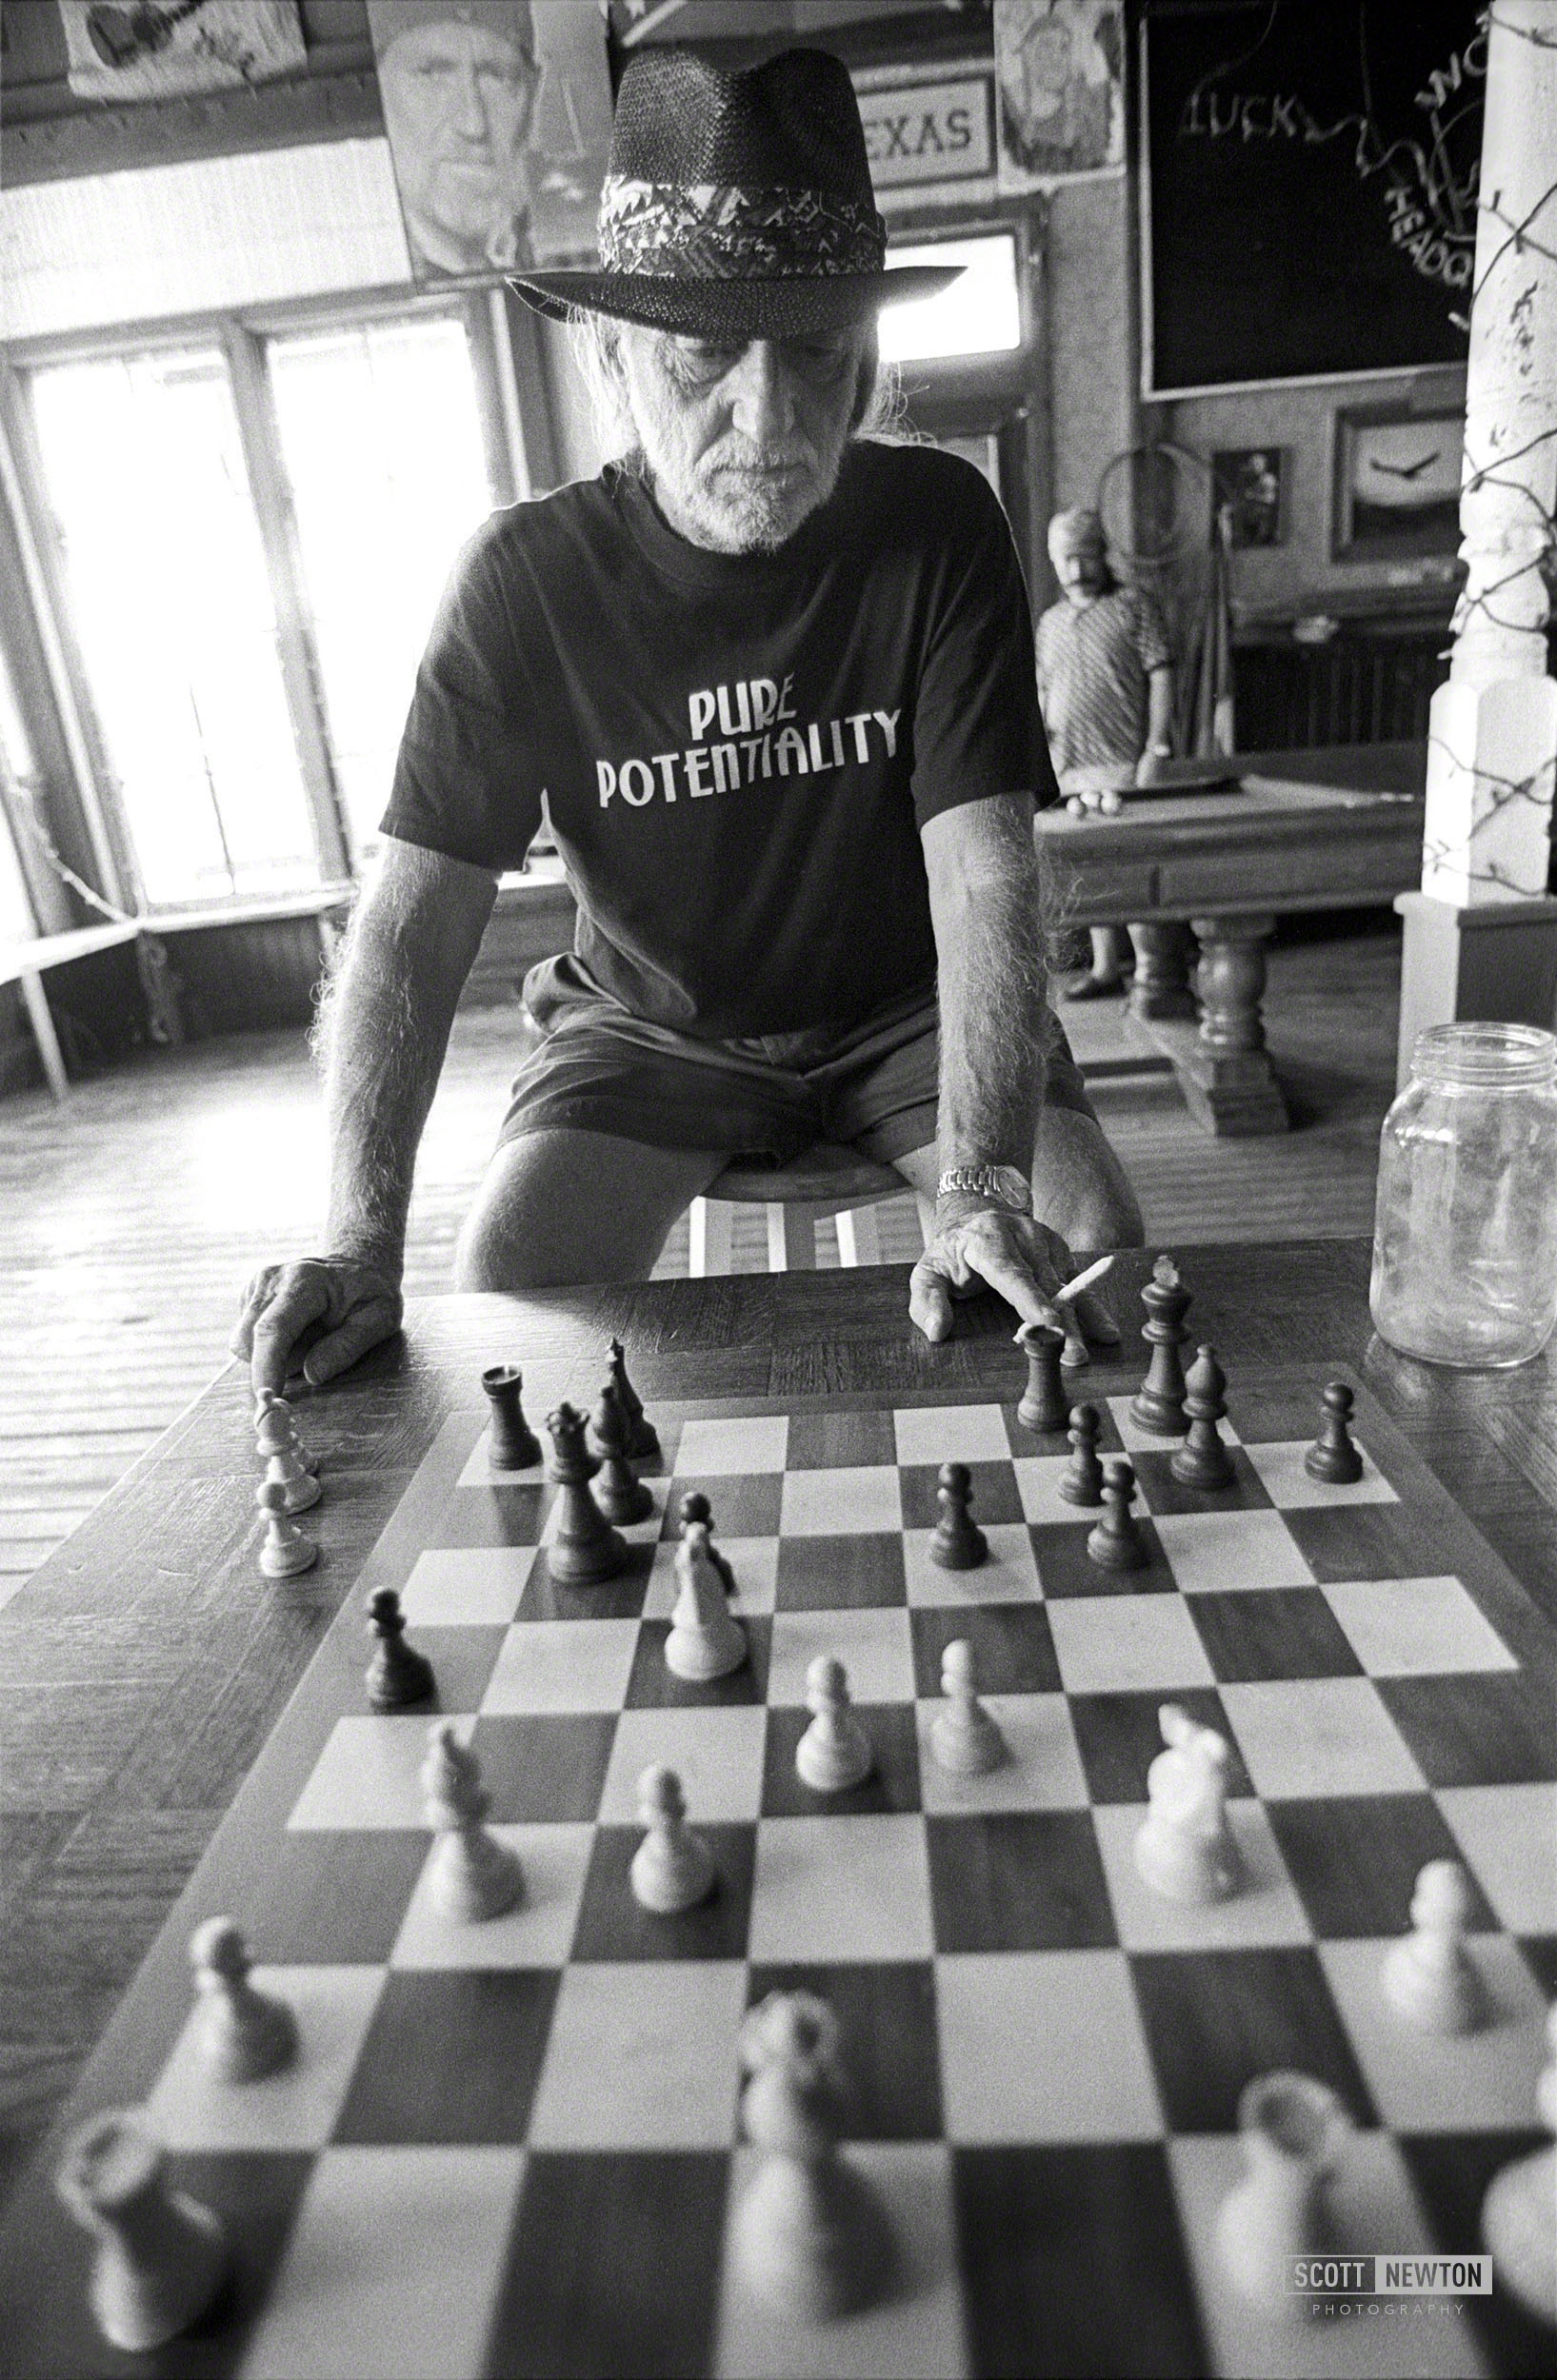 Willie plays chess. Luck, Texas  2000 